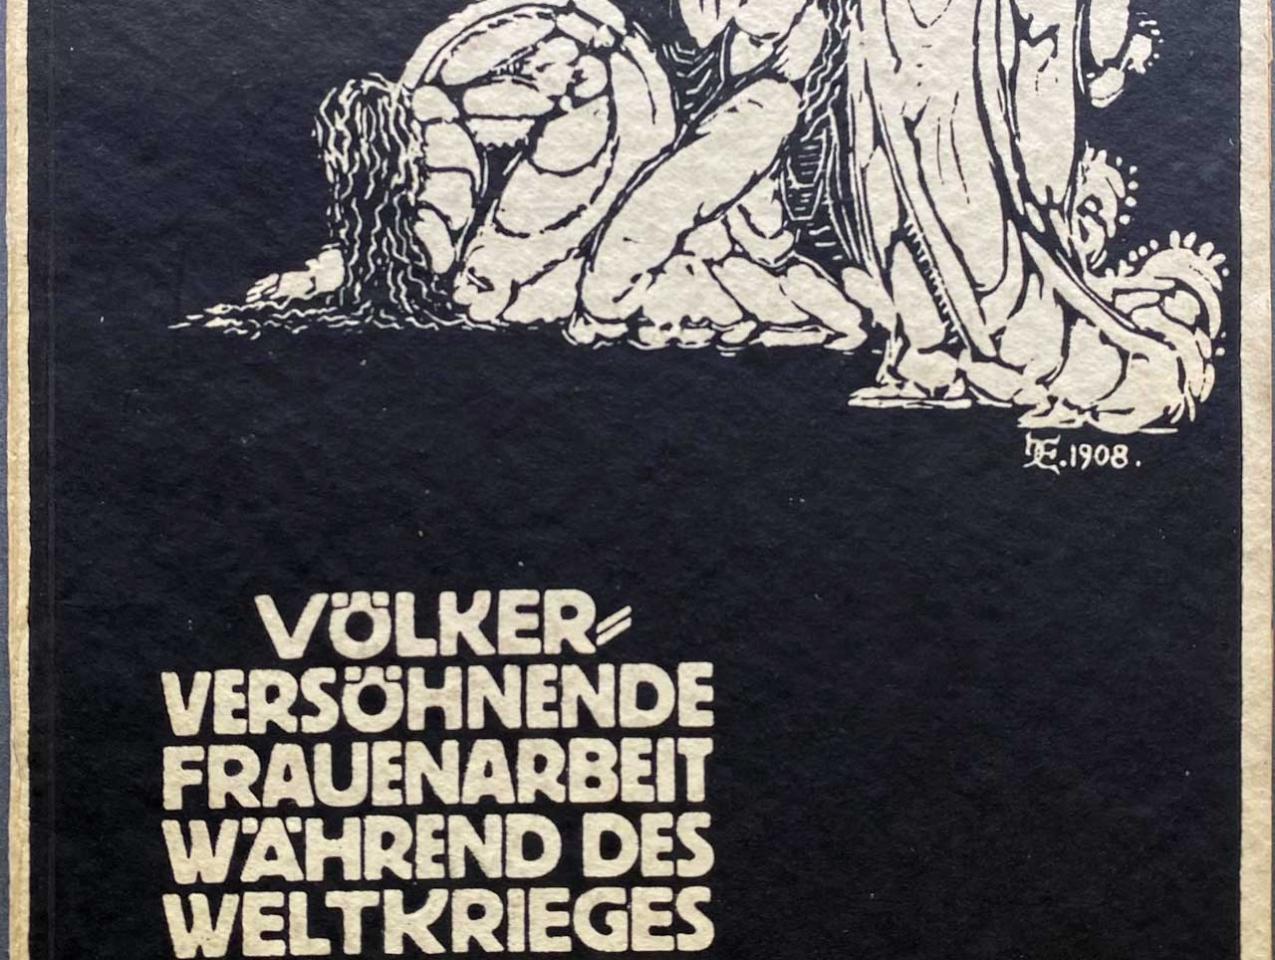 Black book cover with illustrated figures and text in white -Volkerversohnende Frauenarbeit wahrend des Weltkrieges